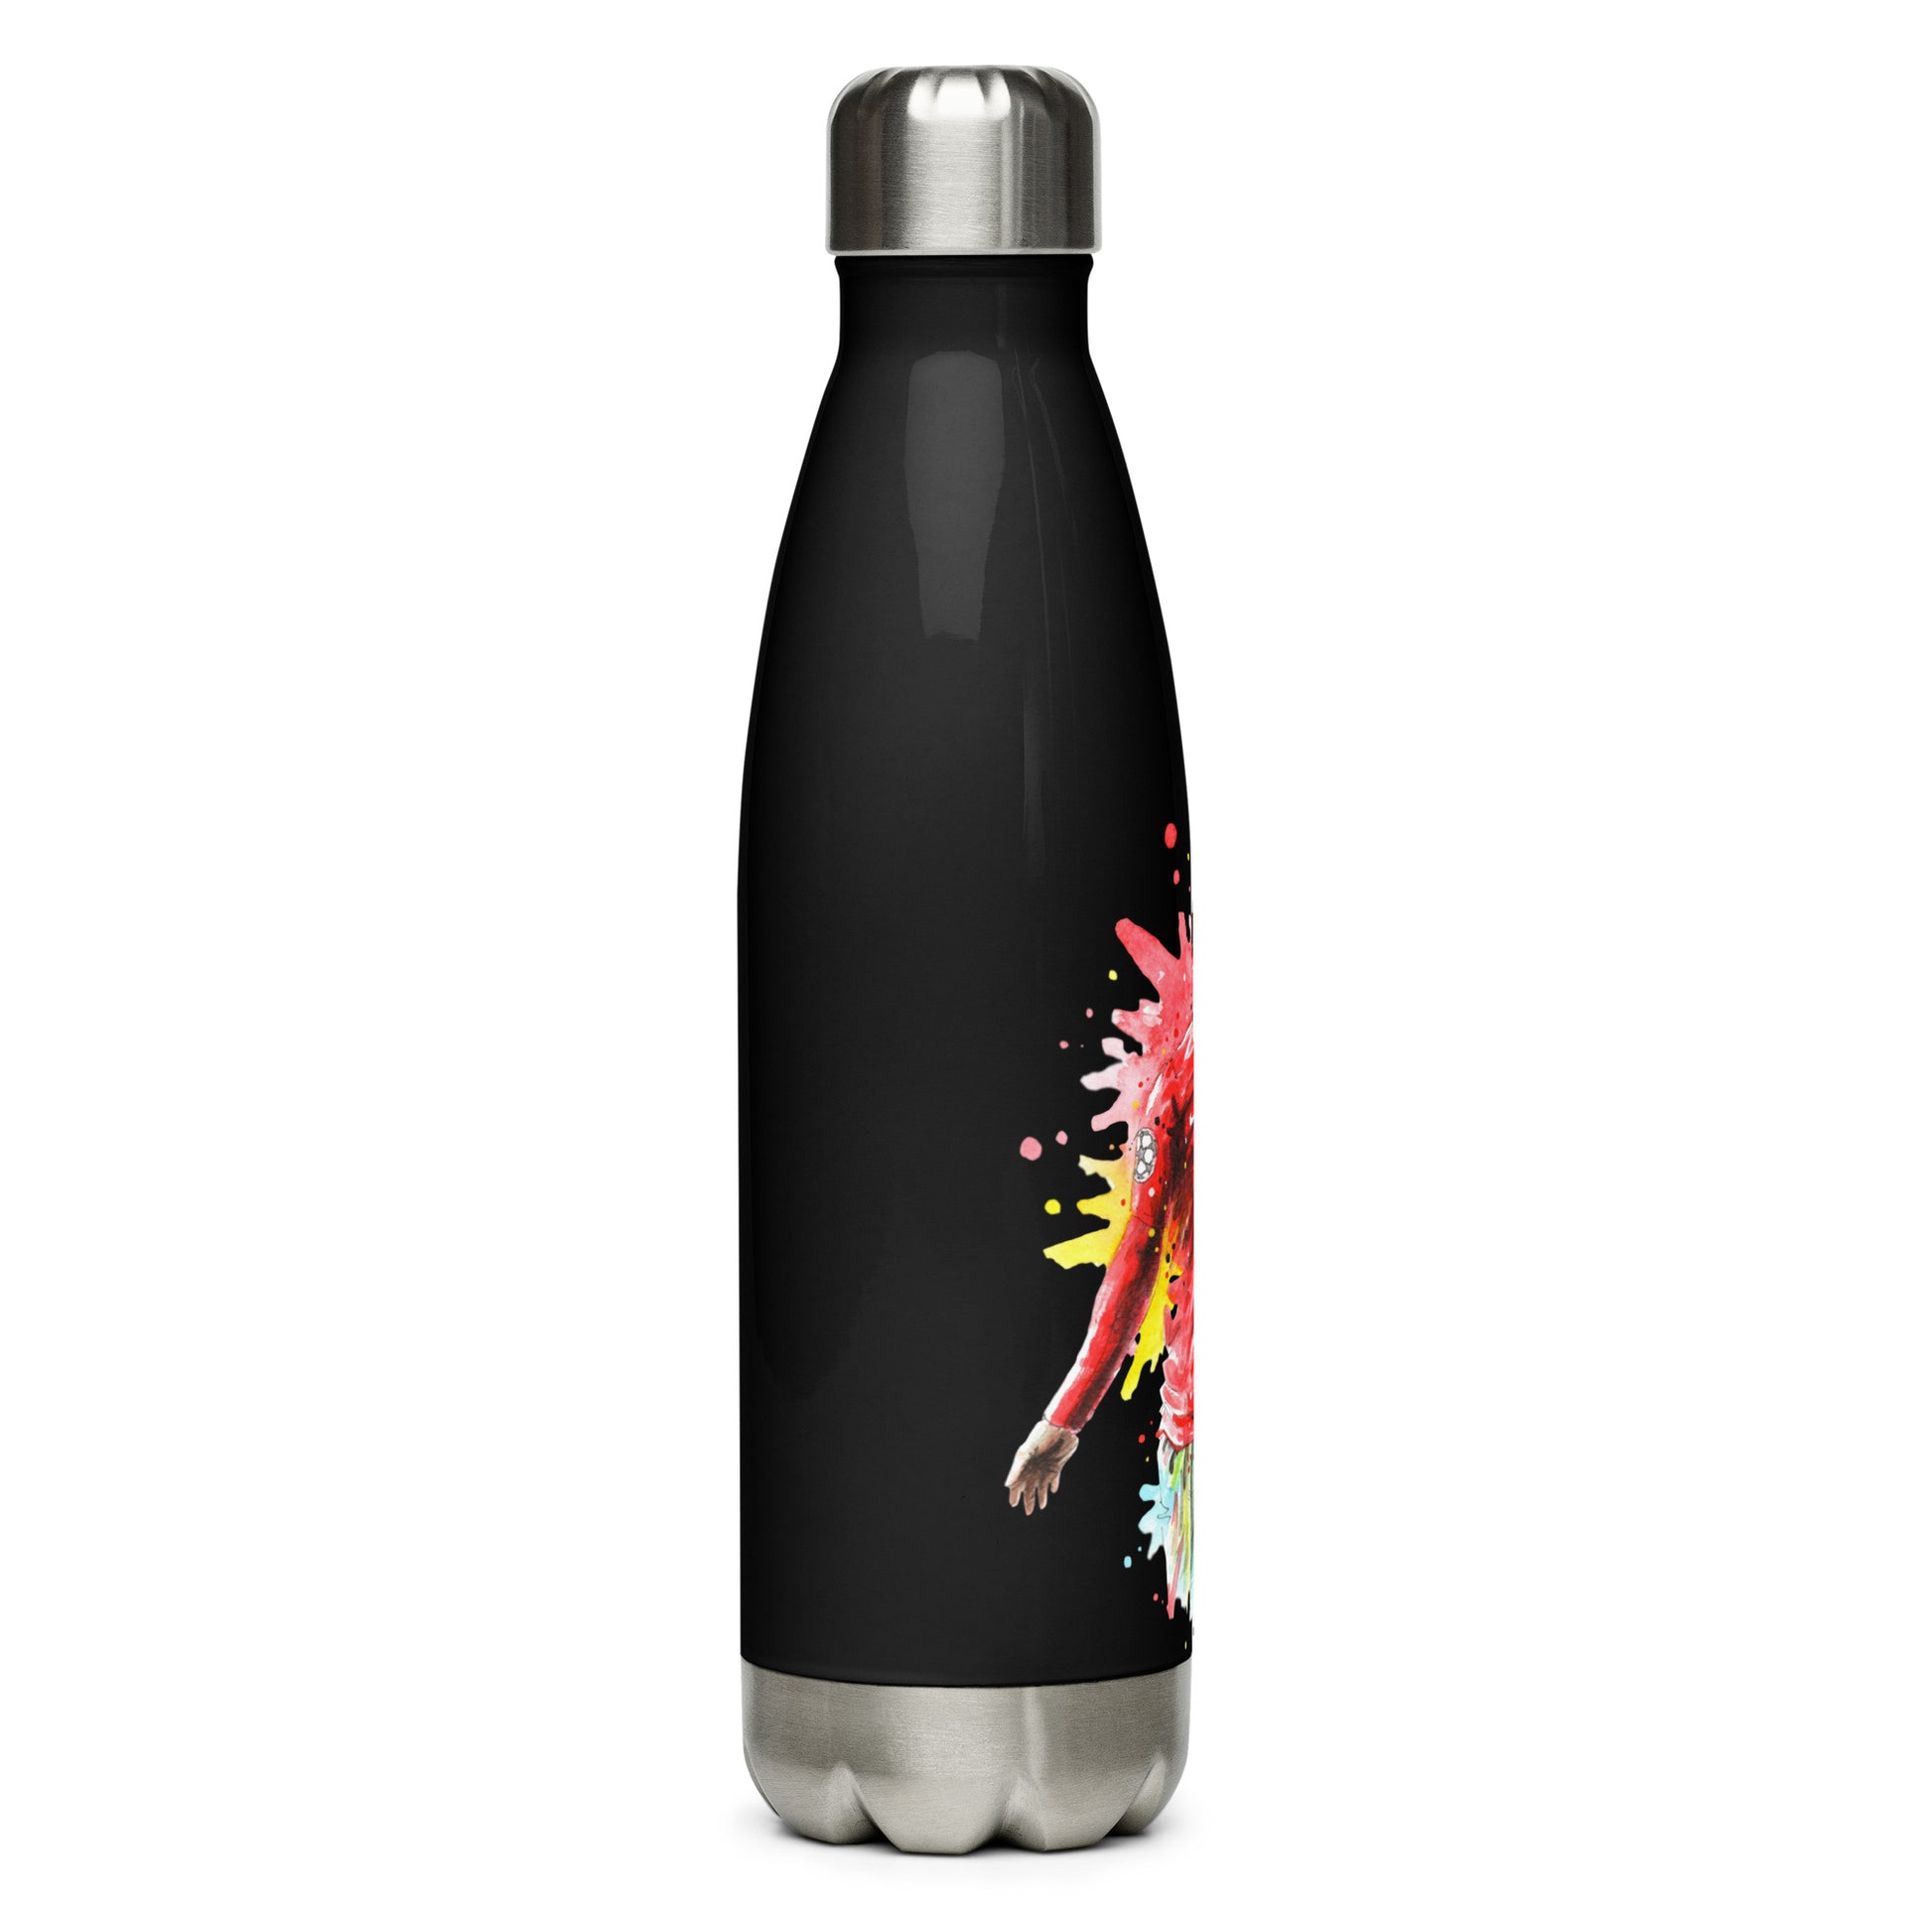 Manchester United Wayne Rooney Vintage Stainless steel water bottle - The 90+ Minute